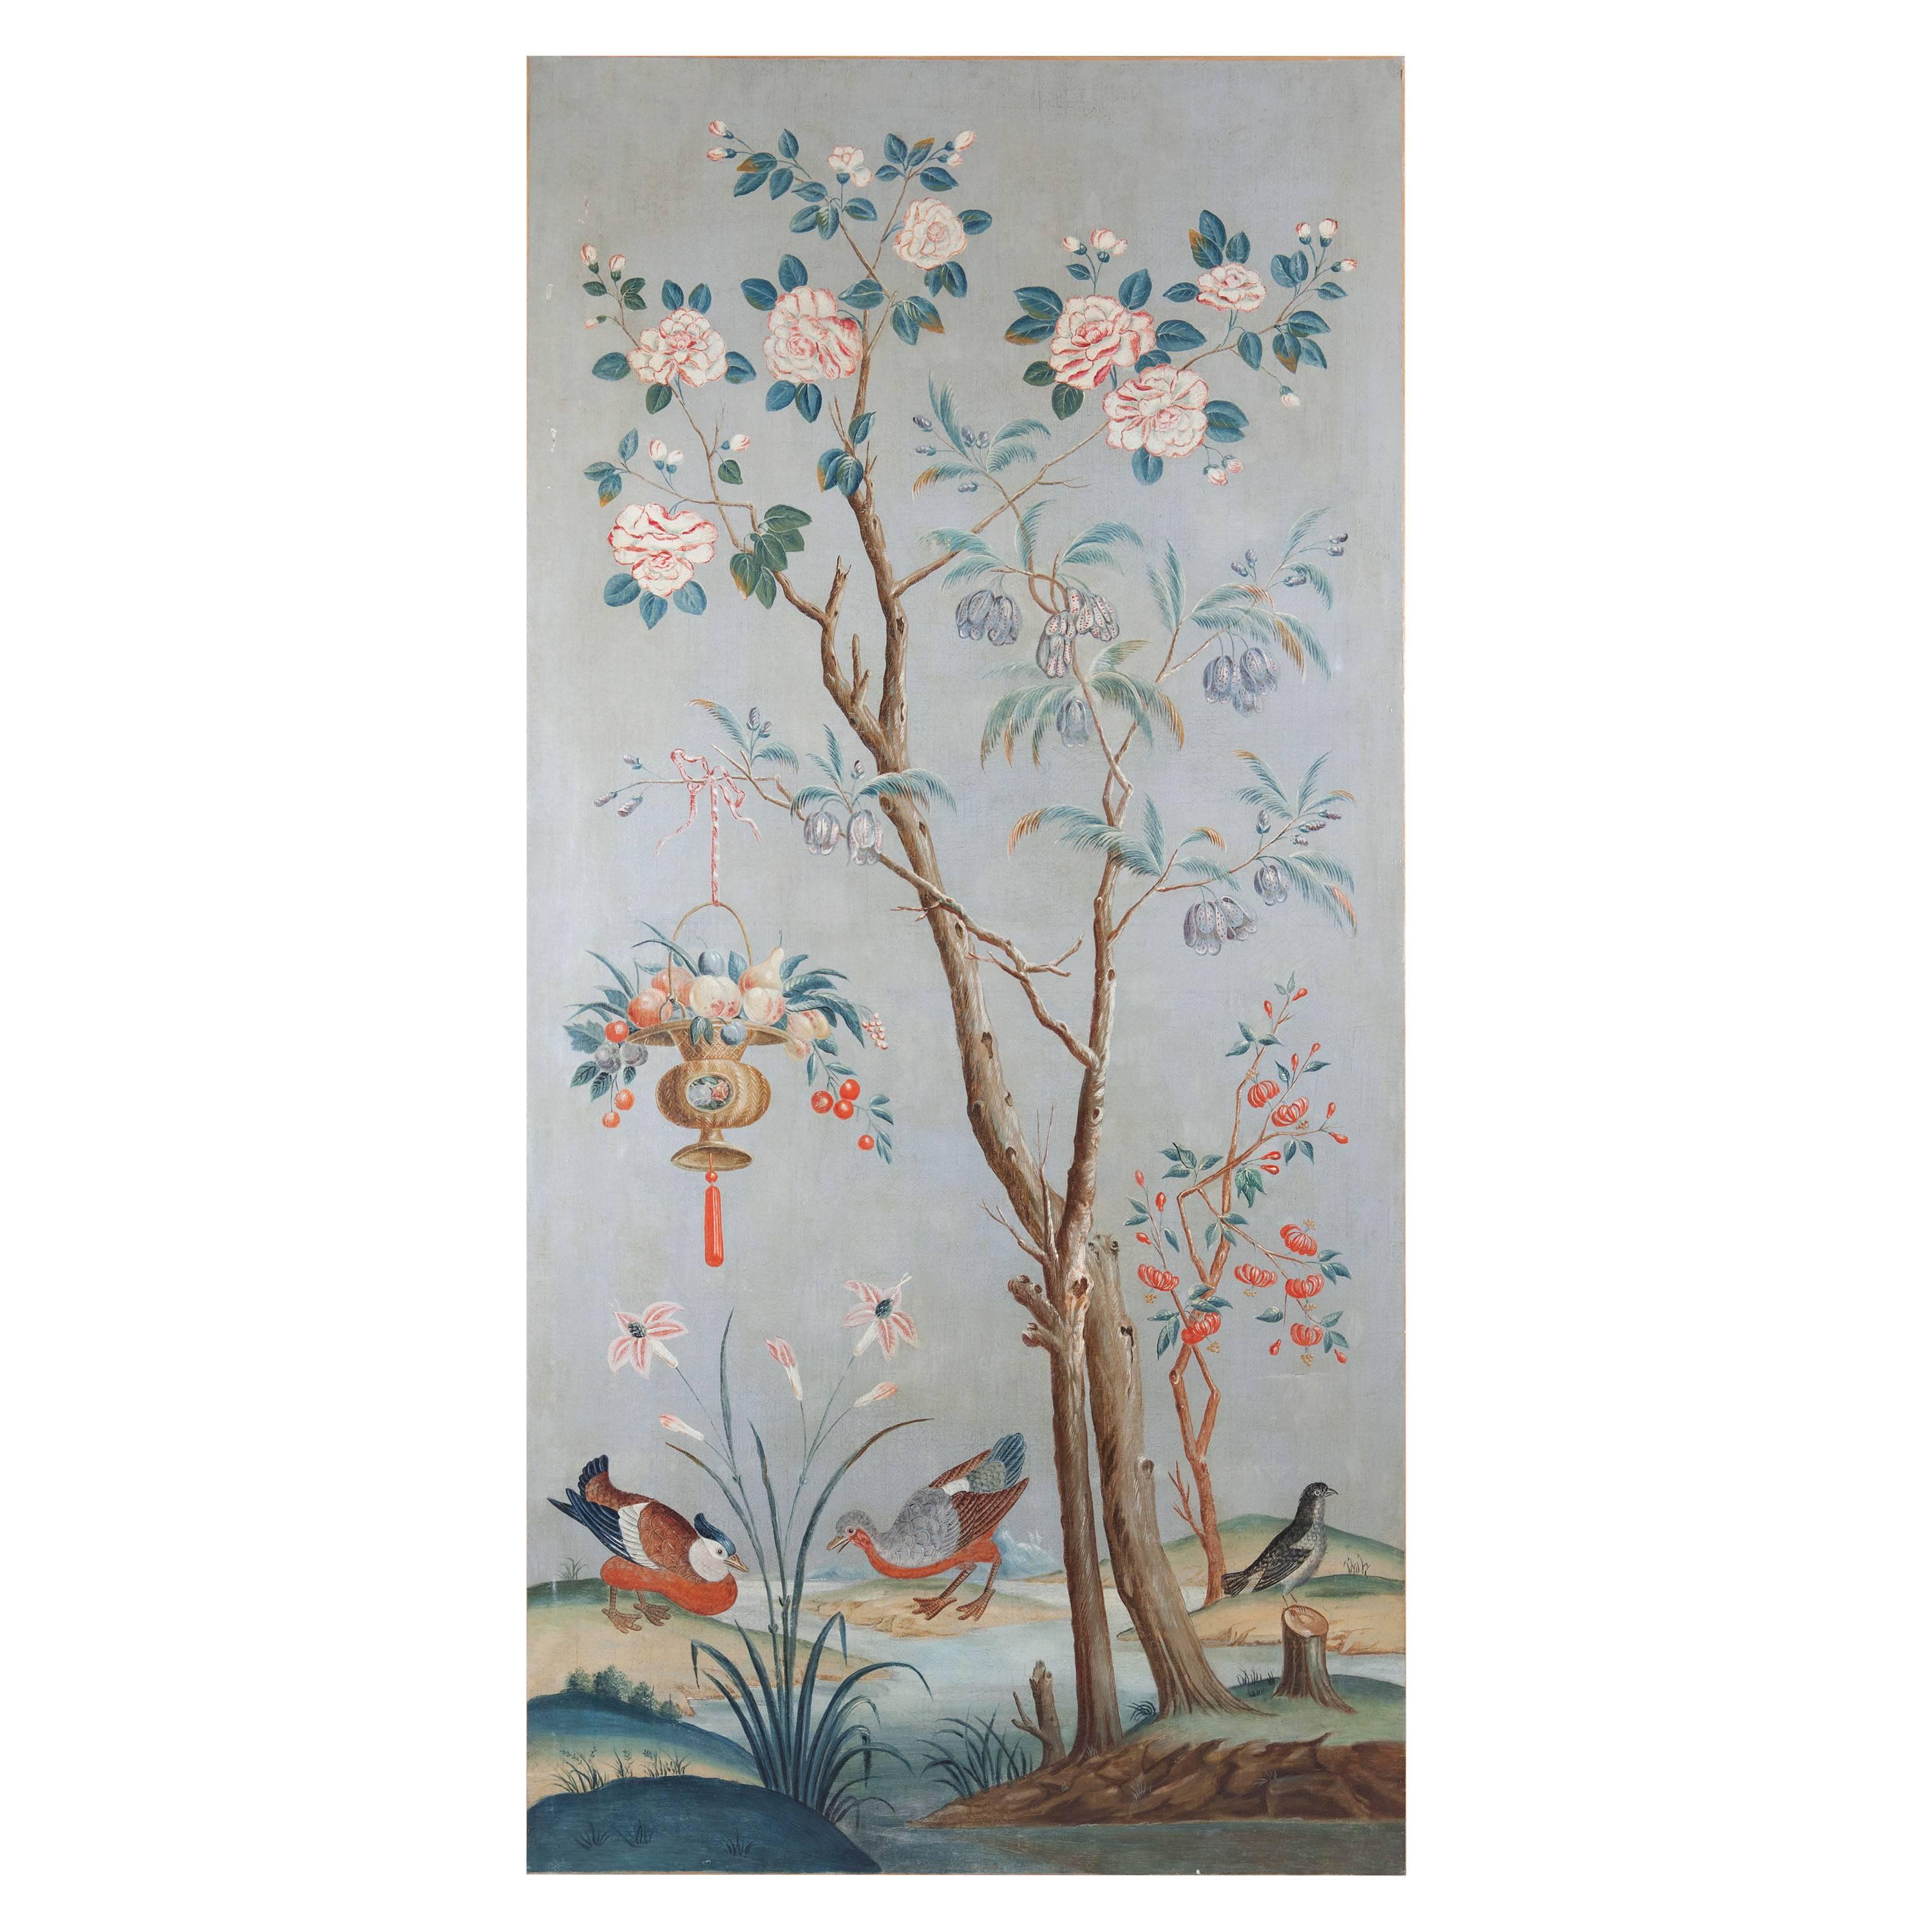 A magnificent and rare set of four large-scale chinoiserie painted panels, each painted with birds among landscape scenes and ornamental decorations. 

Each panel Measures: Height 220cm. / 86.6in
Width 108cm. / 42.5in 